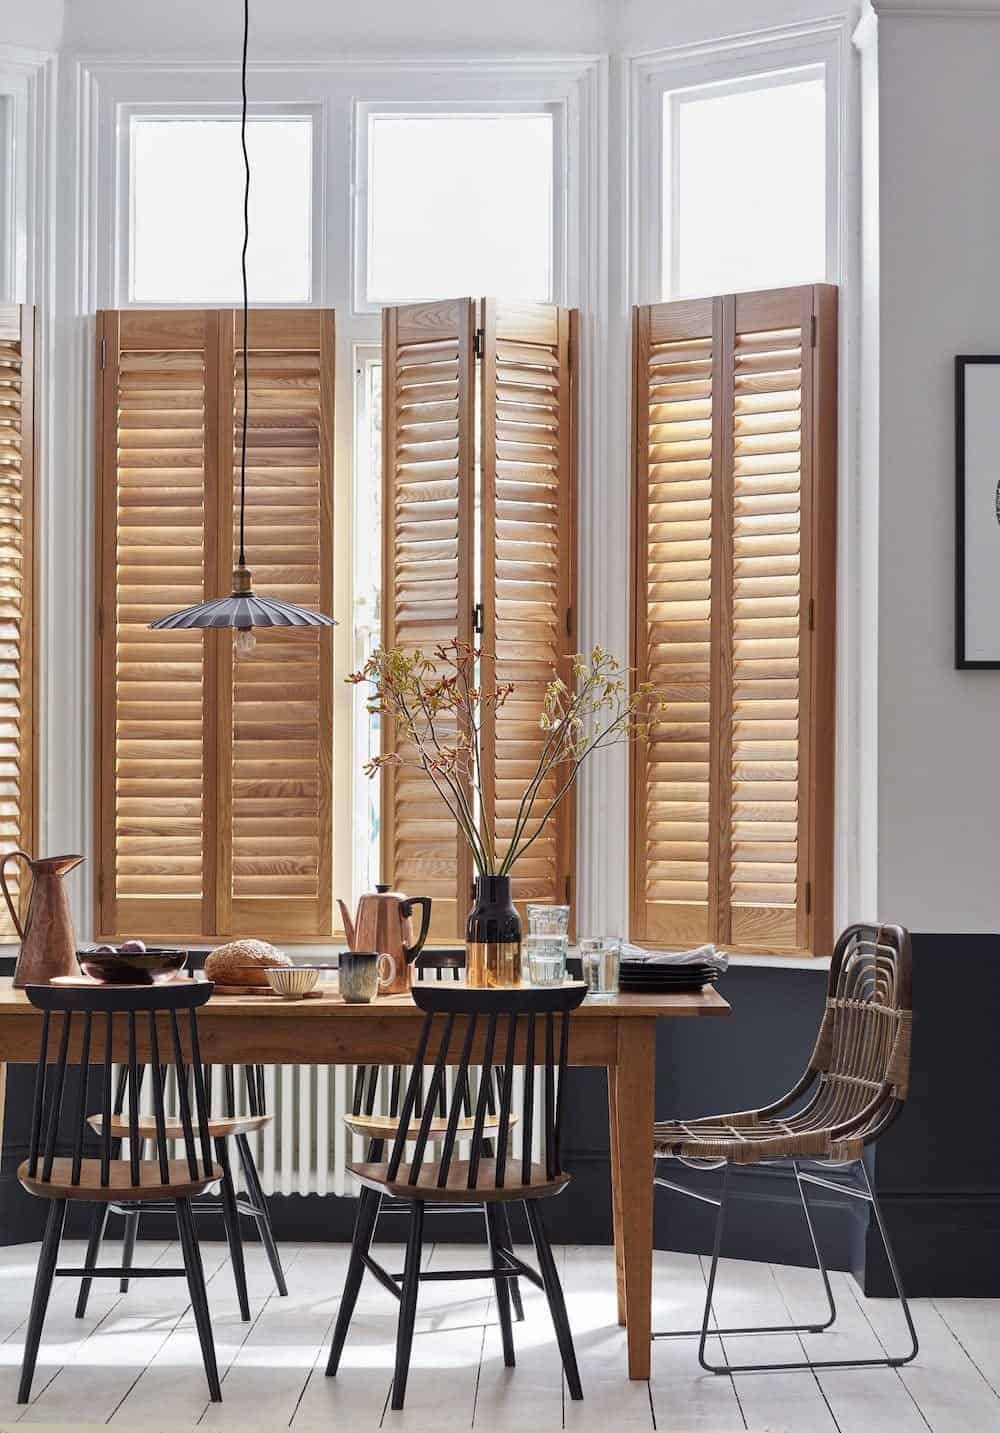 Why Indoor Window Shutters Are the
Perfect Addition to Any Home